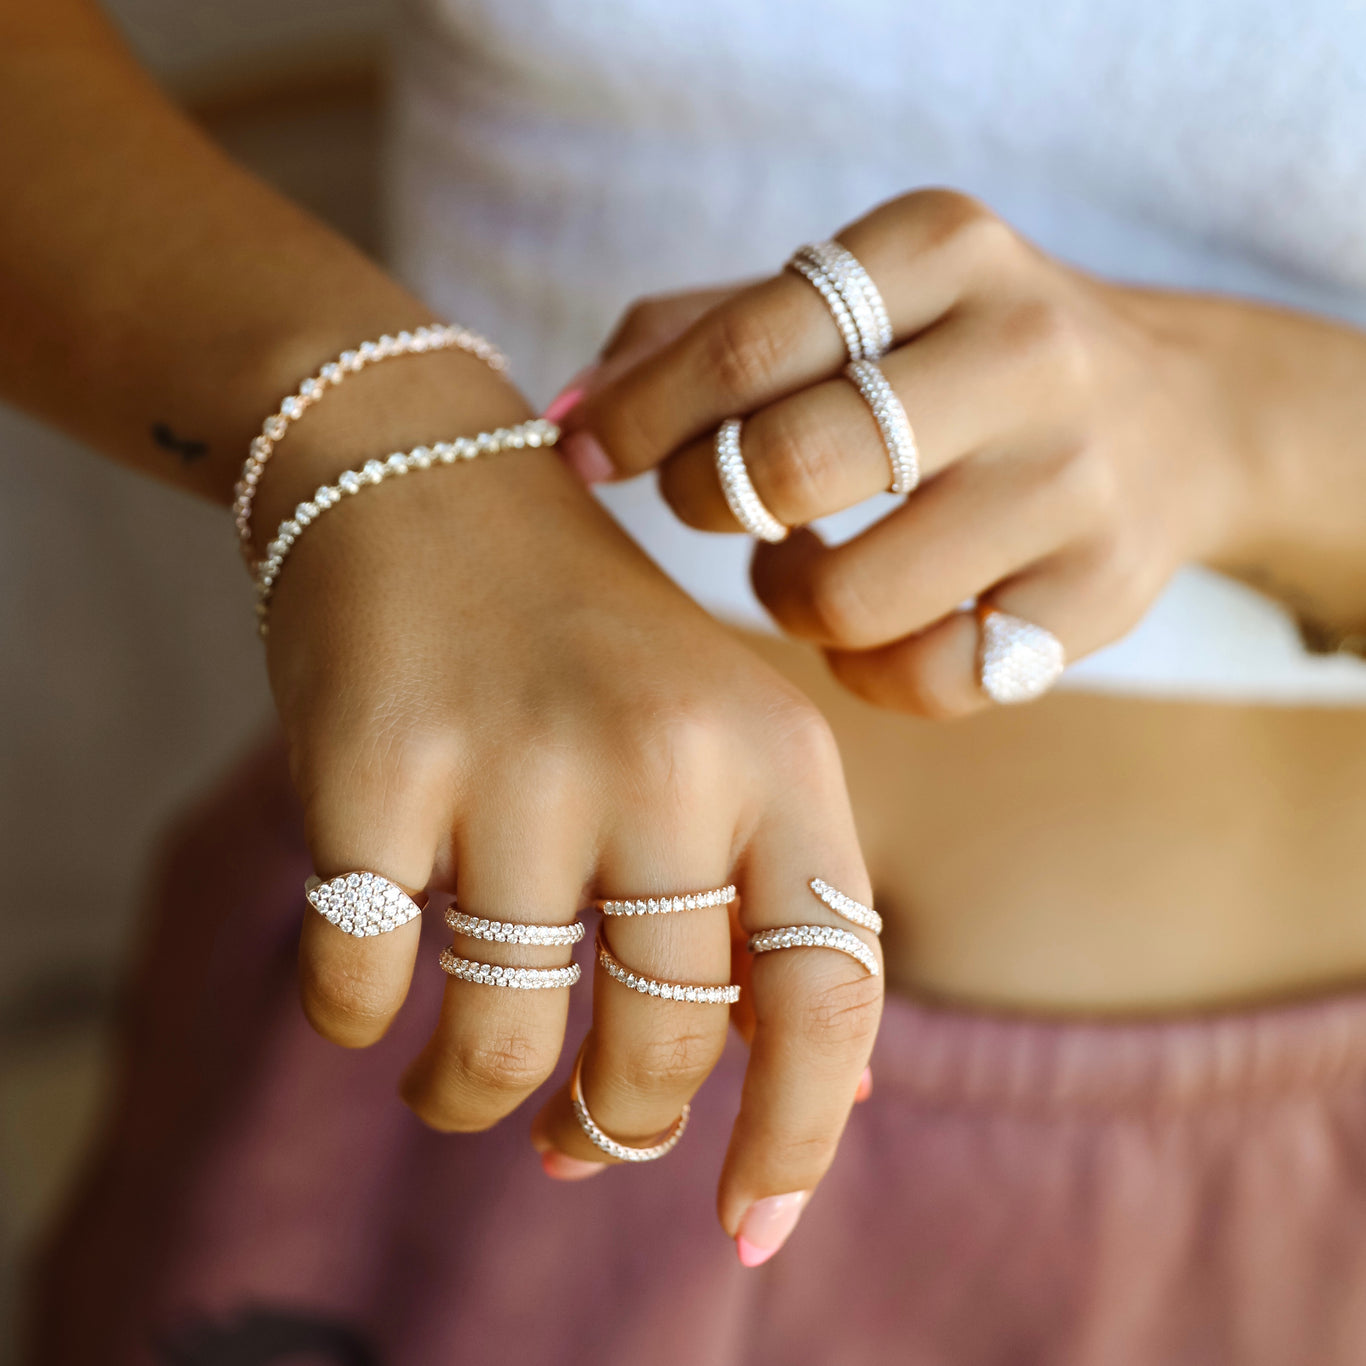 Our Ditto Ring shown with the Gemma Pinky Ring, Arabesque Ring, and Viper Ring.